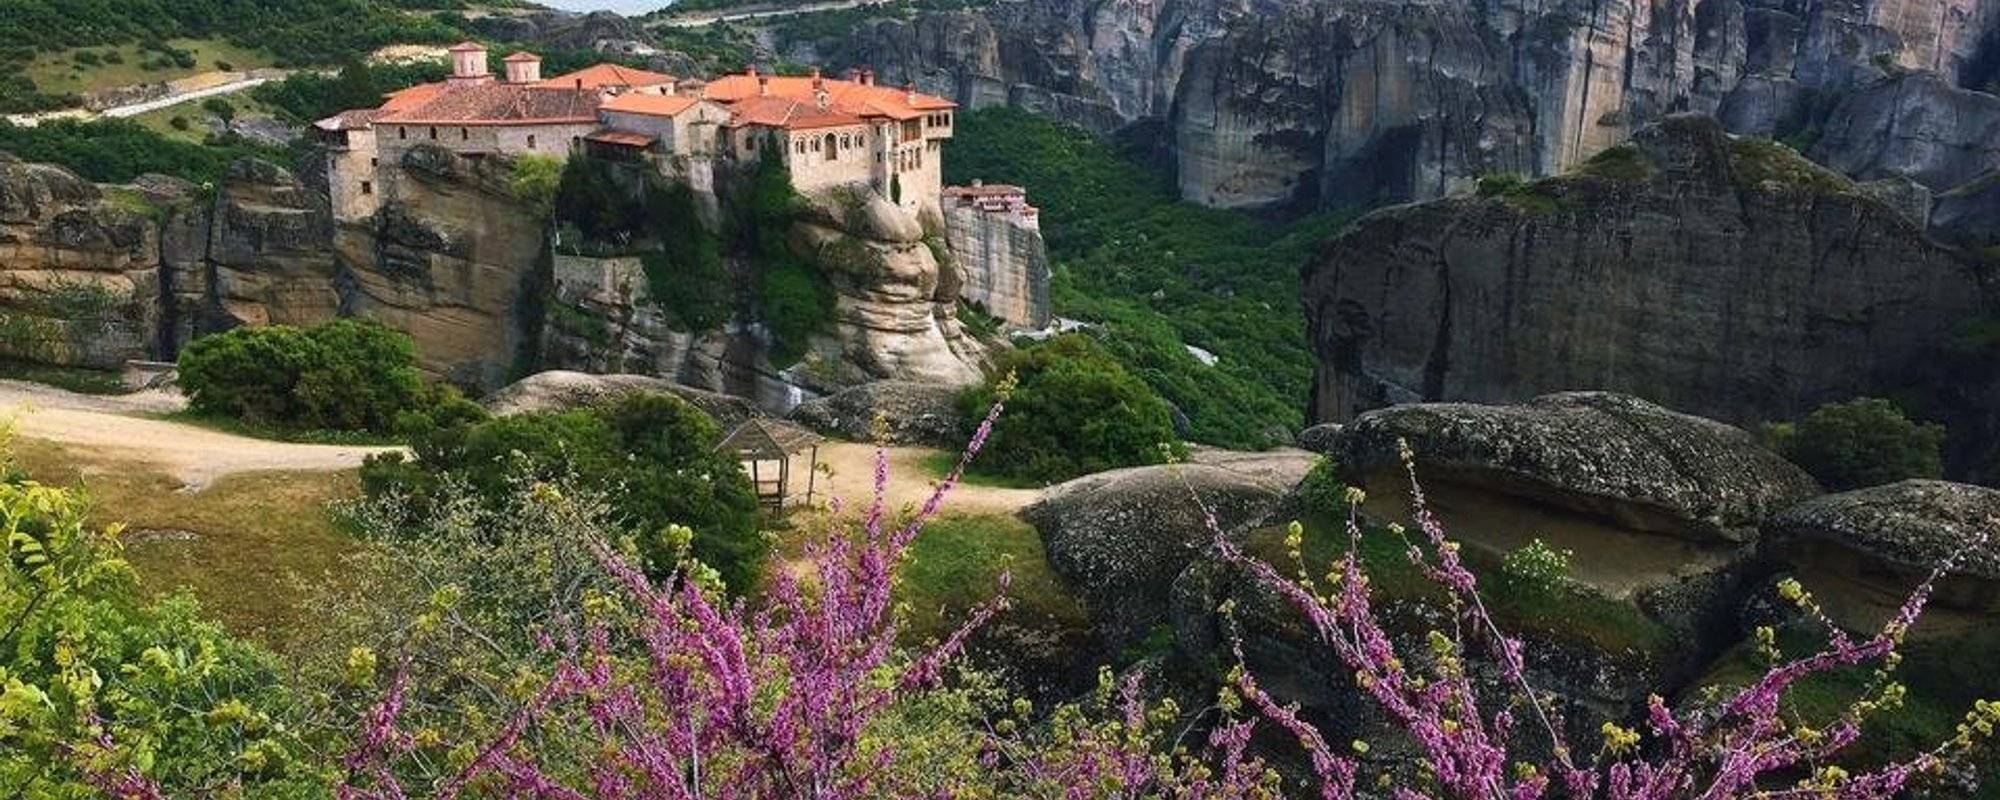 Flying monasteries of Greece. Part two: in the footsteps of Super Agent 007 (+12 photo)